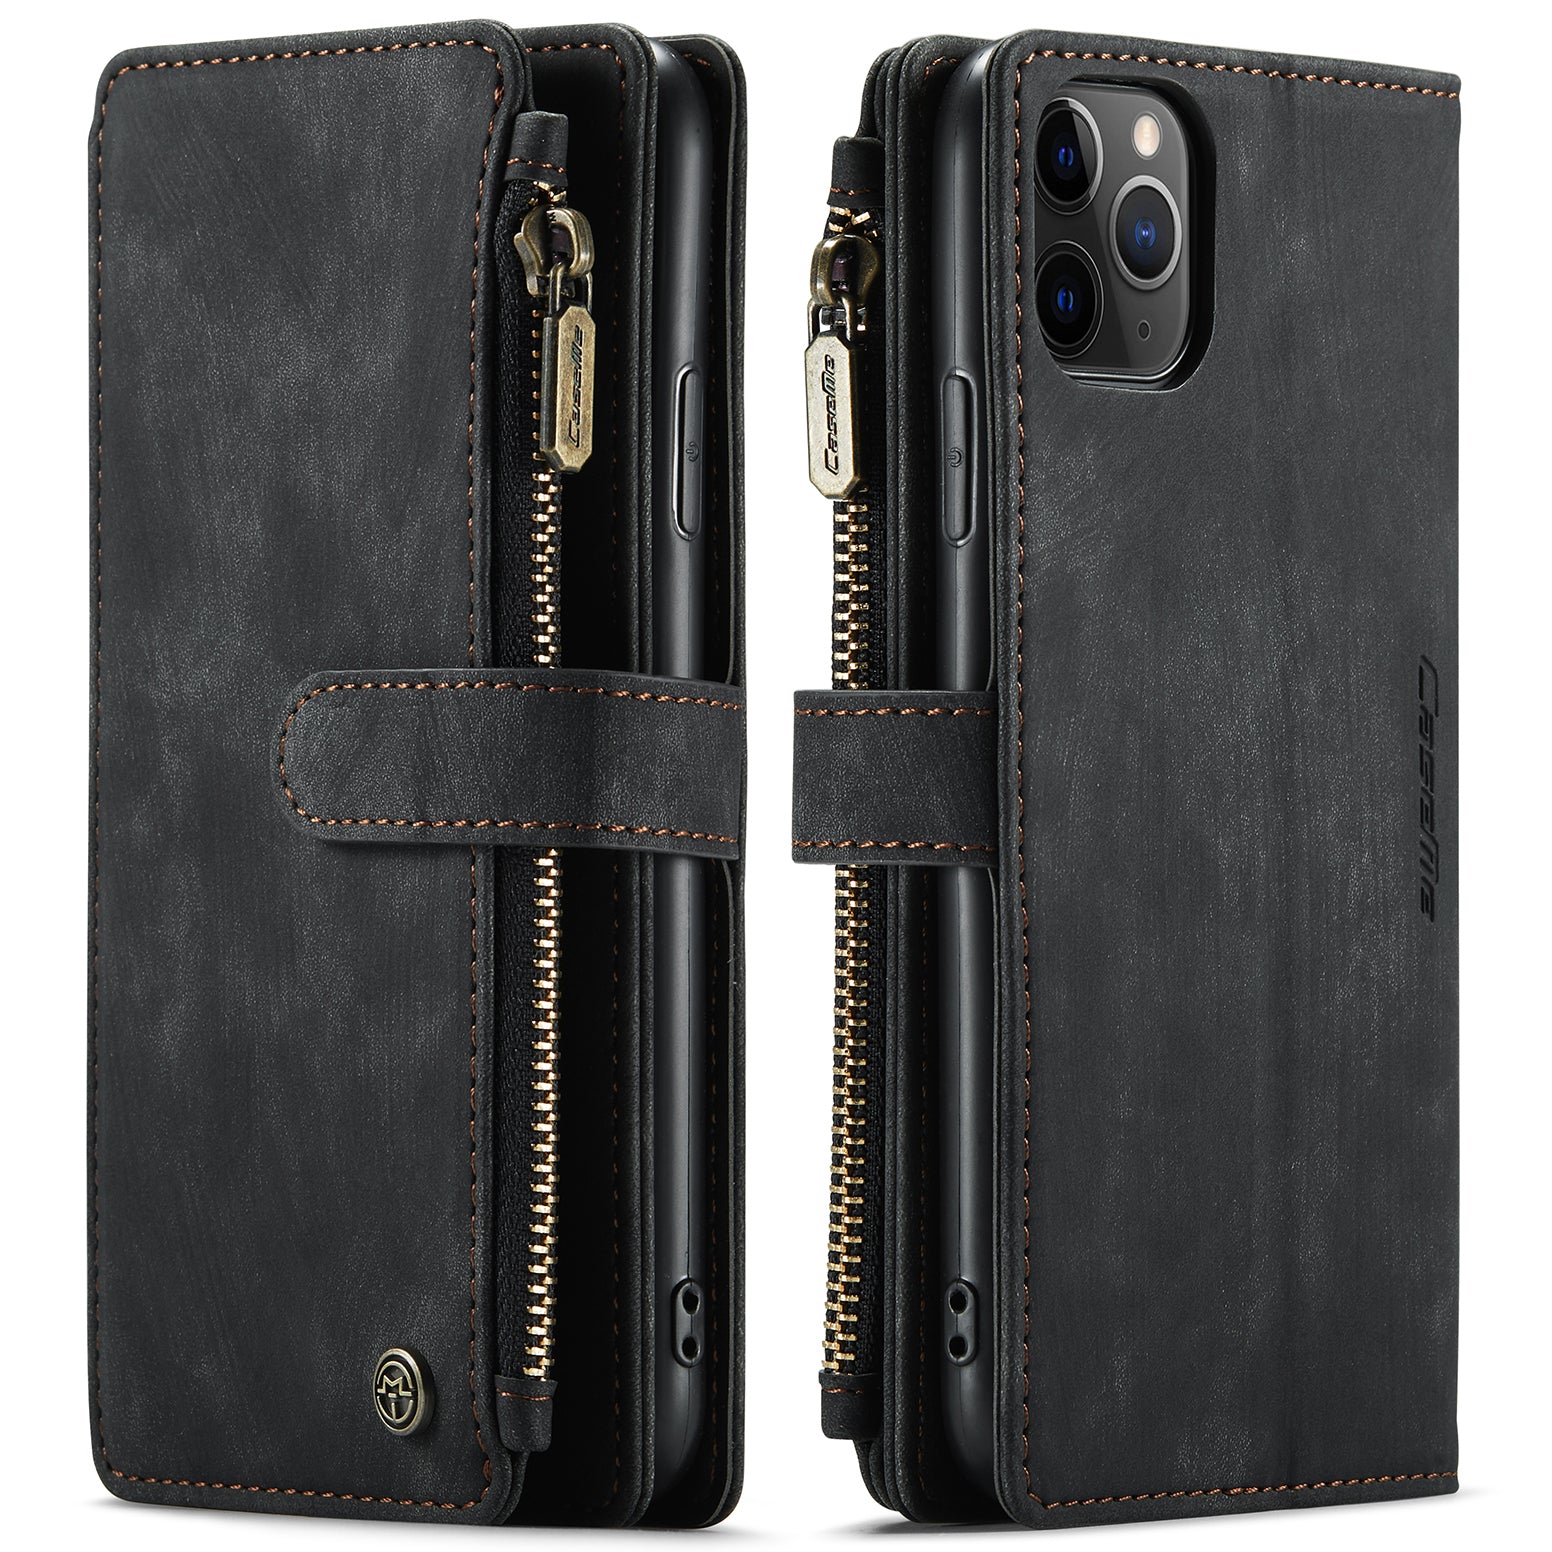 CASEME C30 Series Compatible for iPhone 11 Pro Max 6.5 inch Zipper Pocket  Shockproof PU Leather Wallet Case Phone Stand Cover with 10 Card Slots